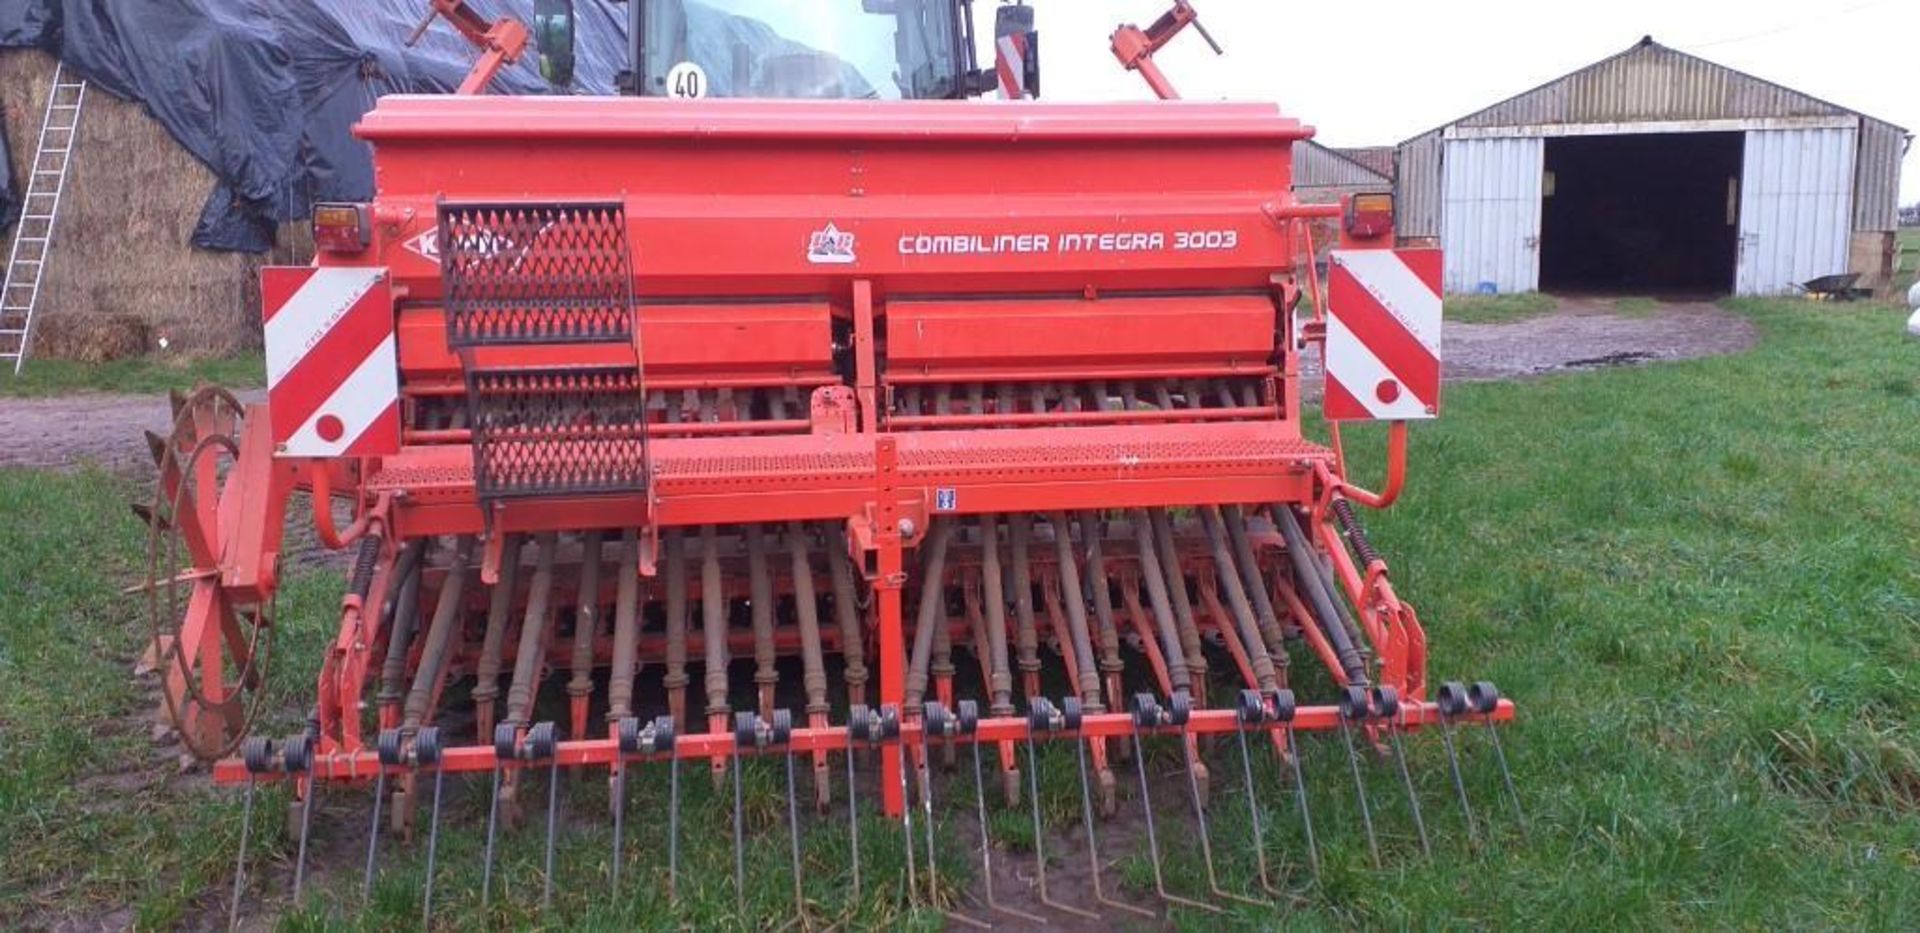 2012 Kuhn Integra 3003 c/w Kuhn CD300 Tine Cultivator - (Lincolnshire) - Image 3 of 10